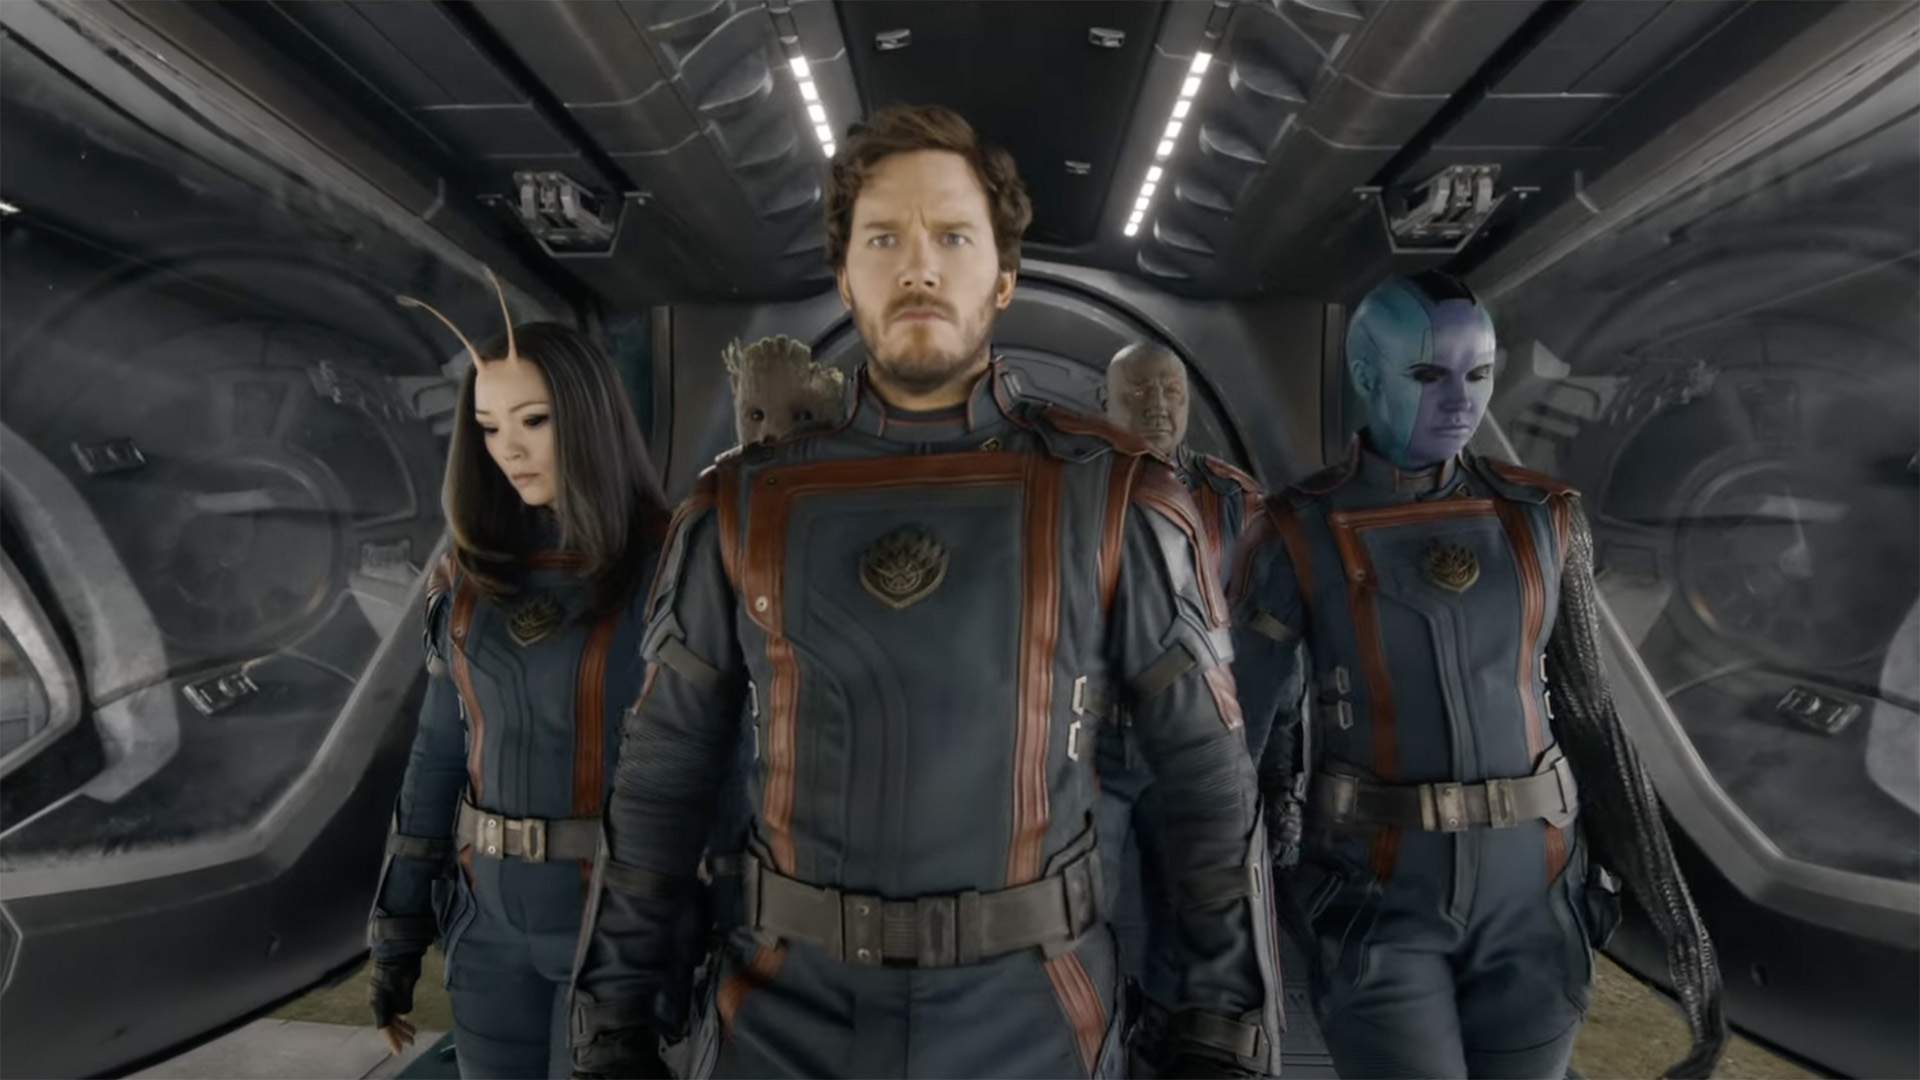 The 'Guardians of the Galaxy Vol. 3' Trailer Brings Marvel's Space-Hopping Superhero Crew Back Together